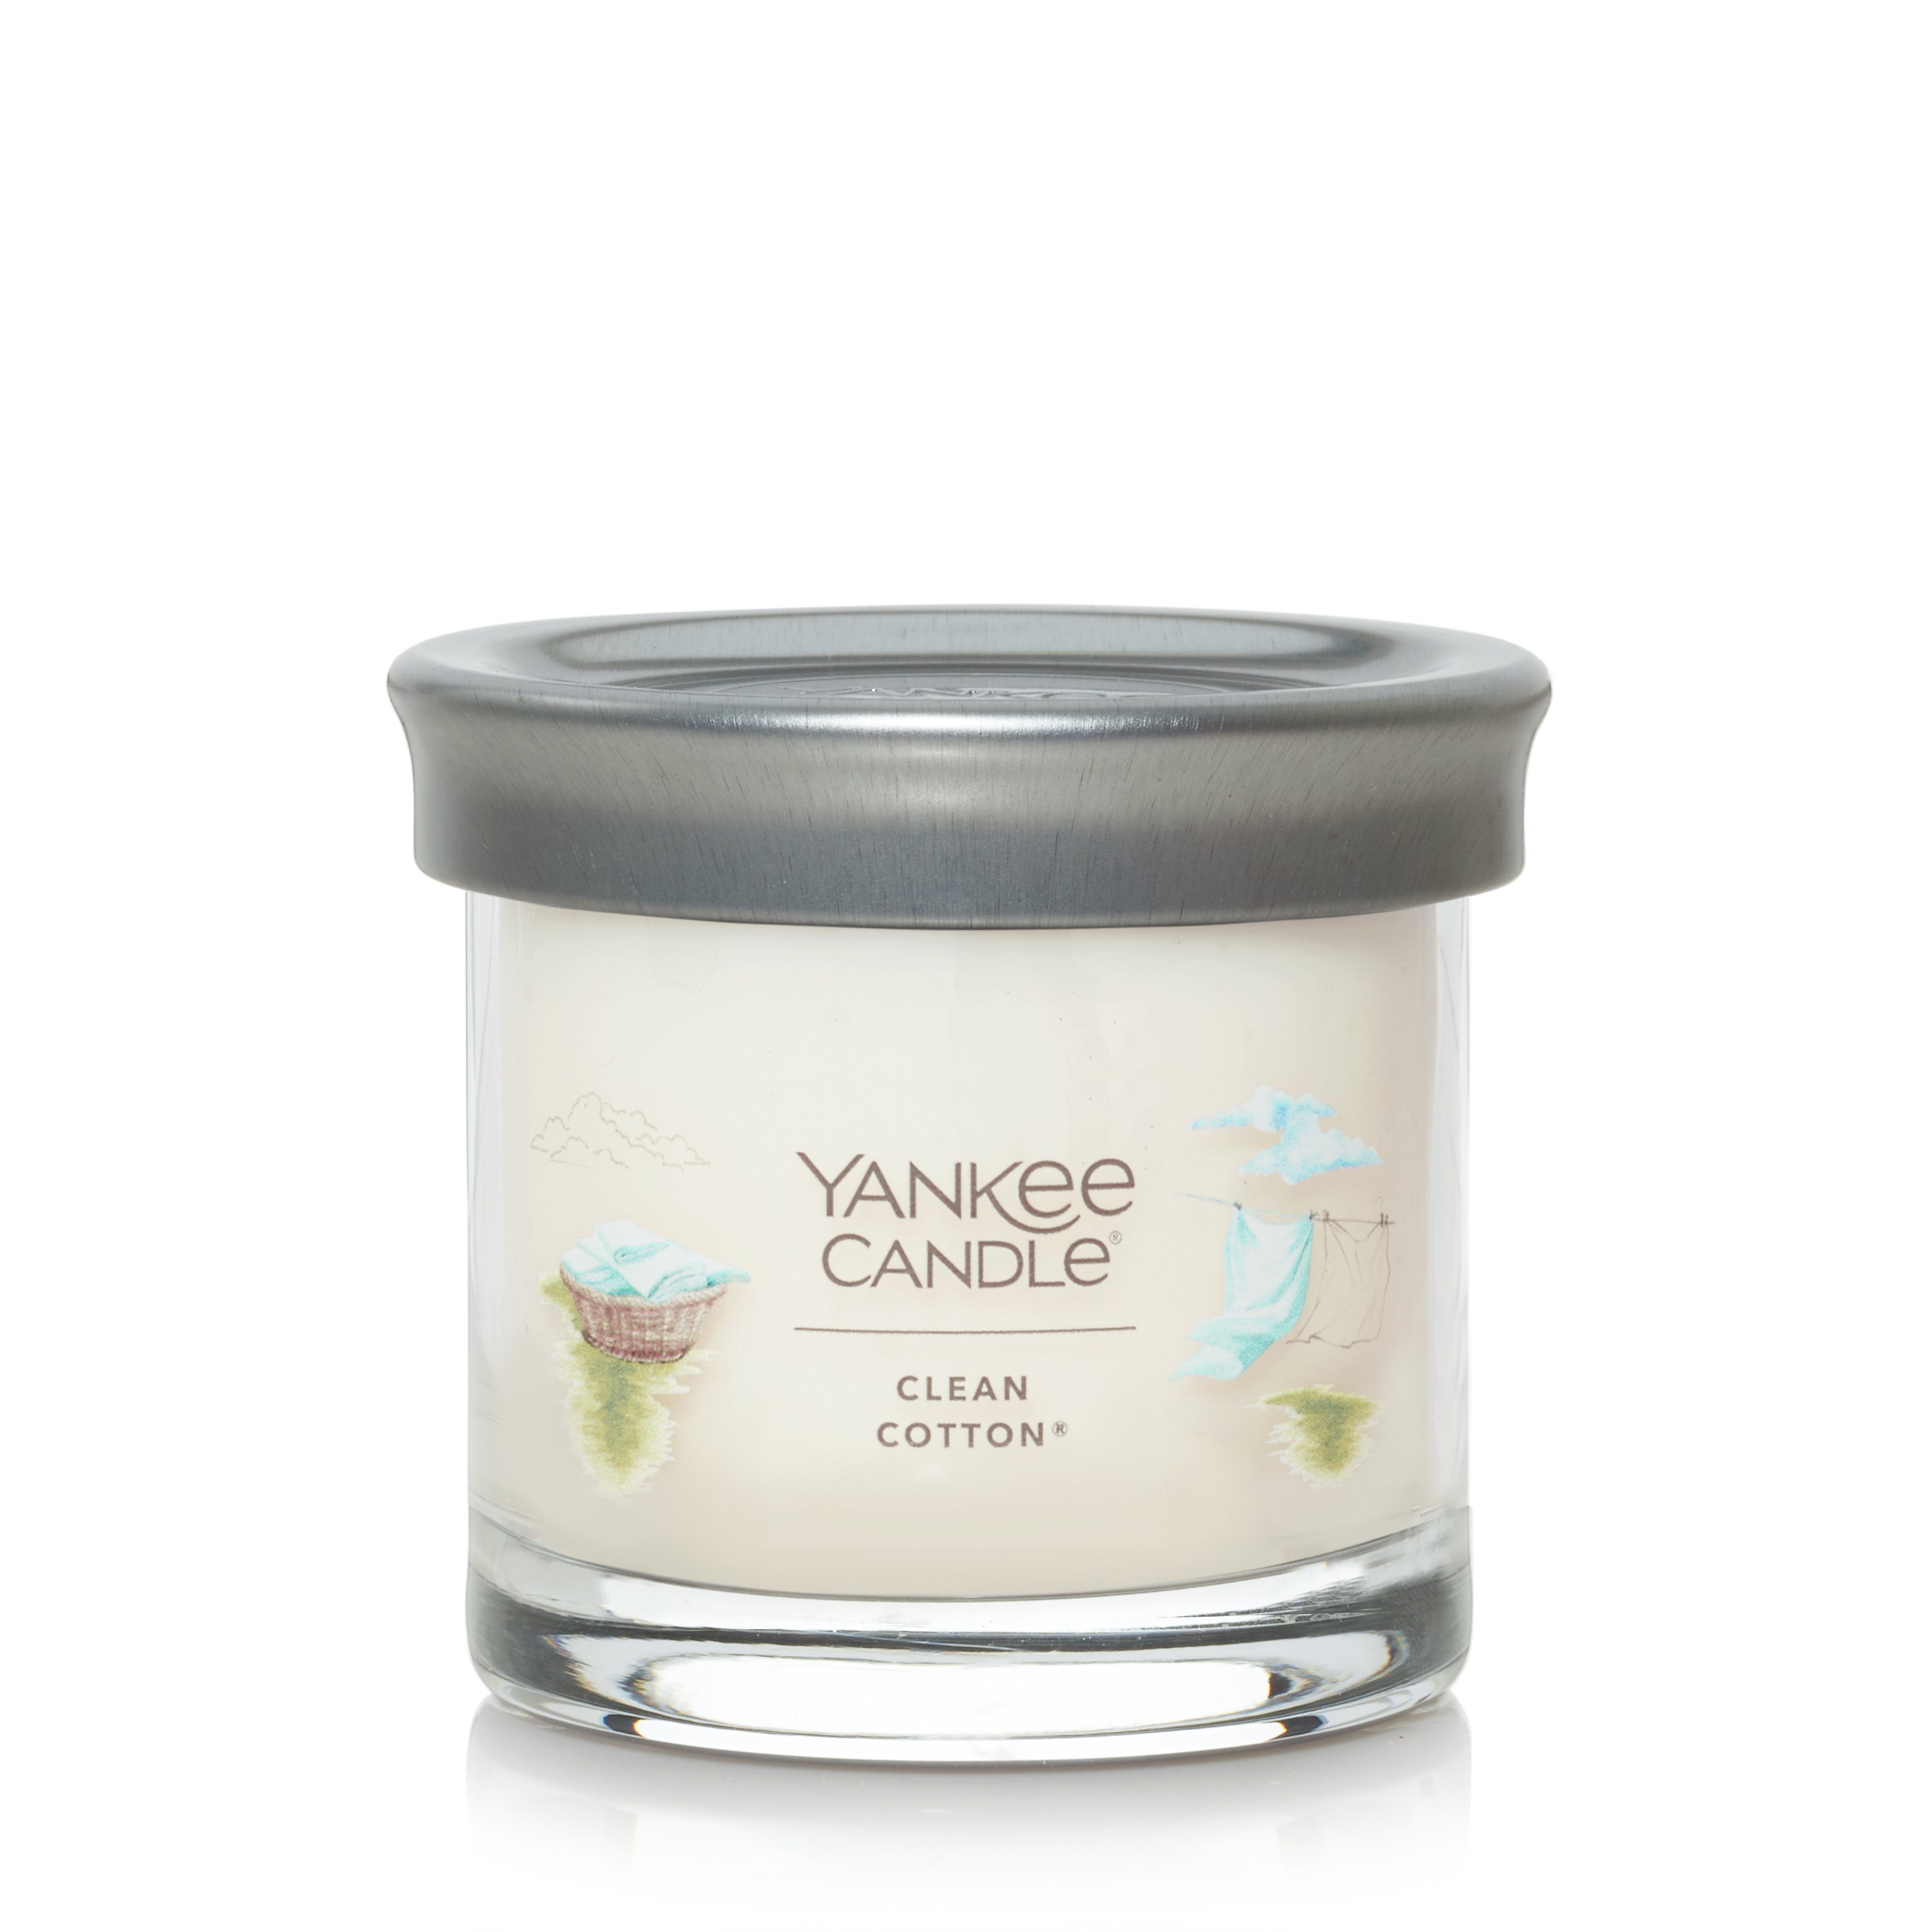 Yankee Candle 1630730 Clean Cotton Signature Small Tumbler Candle